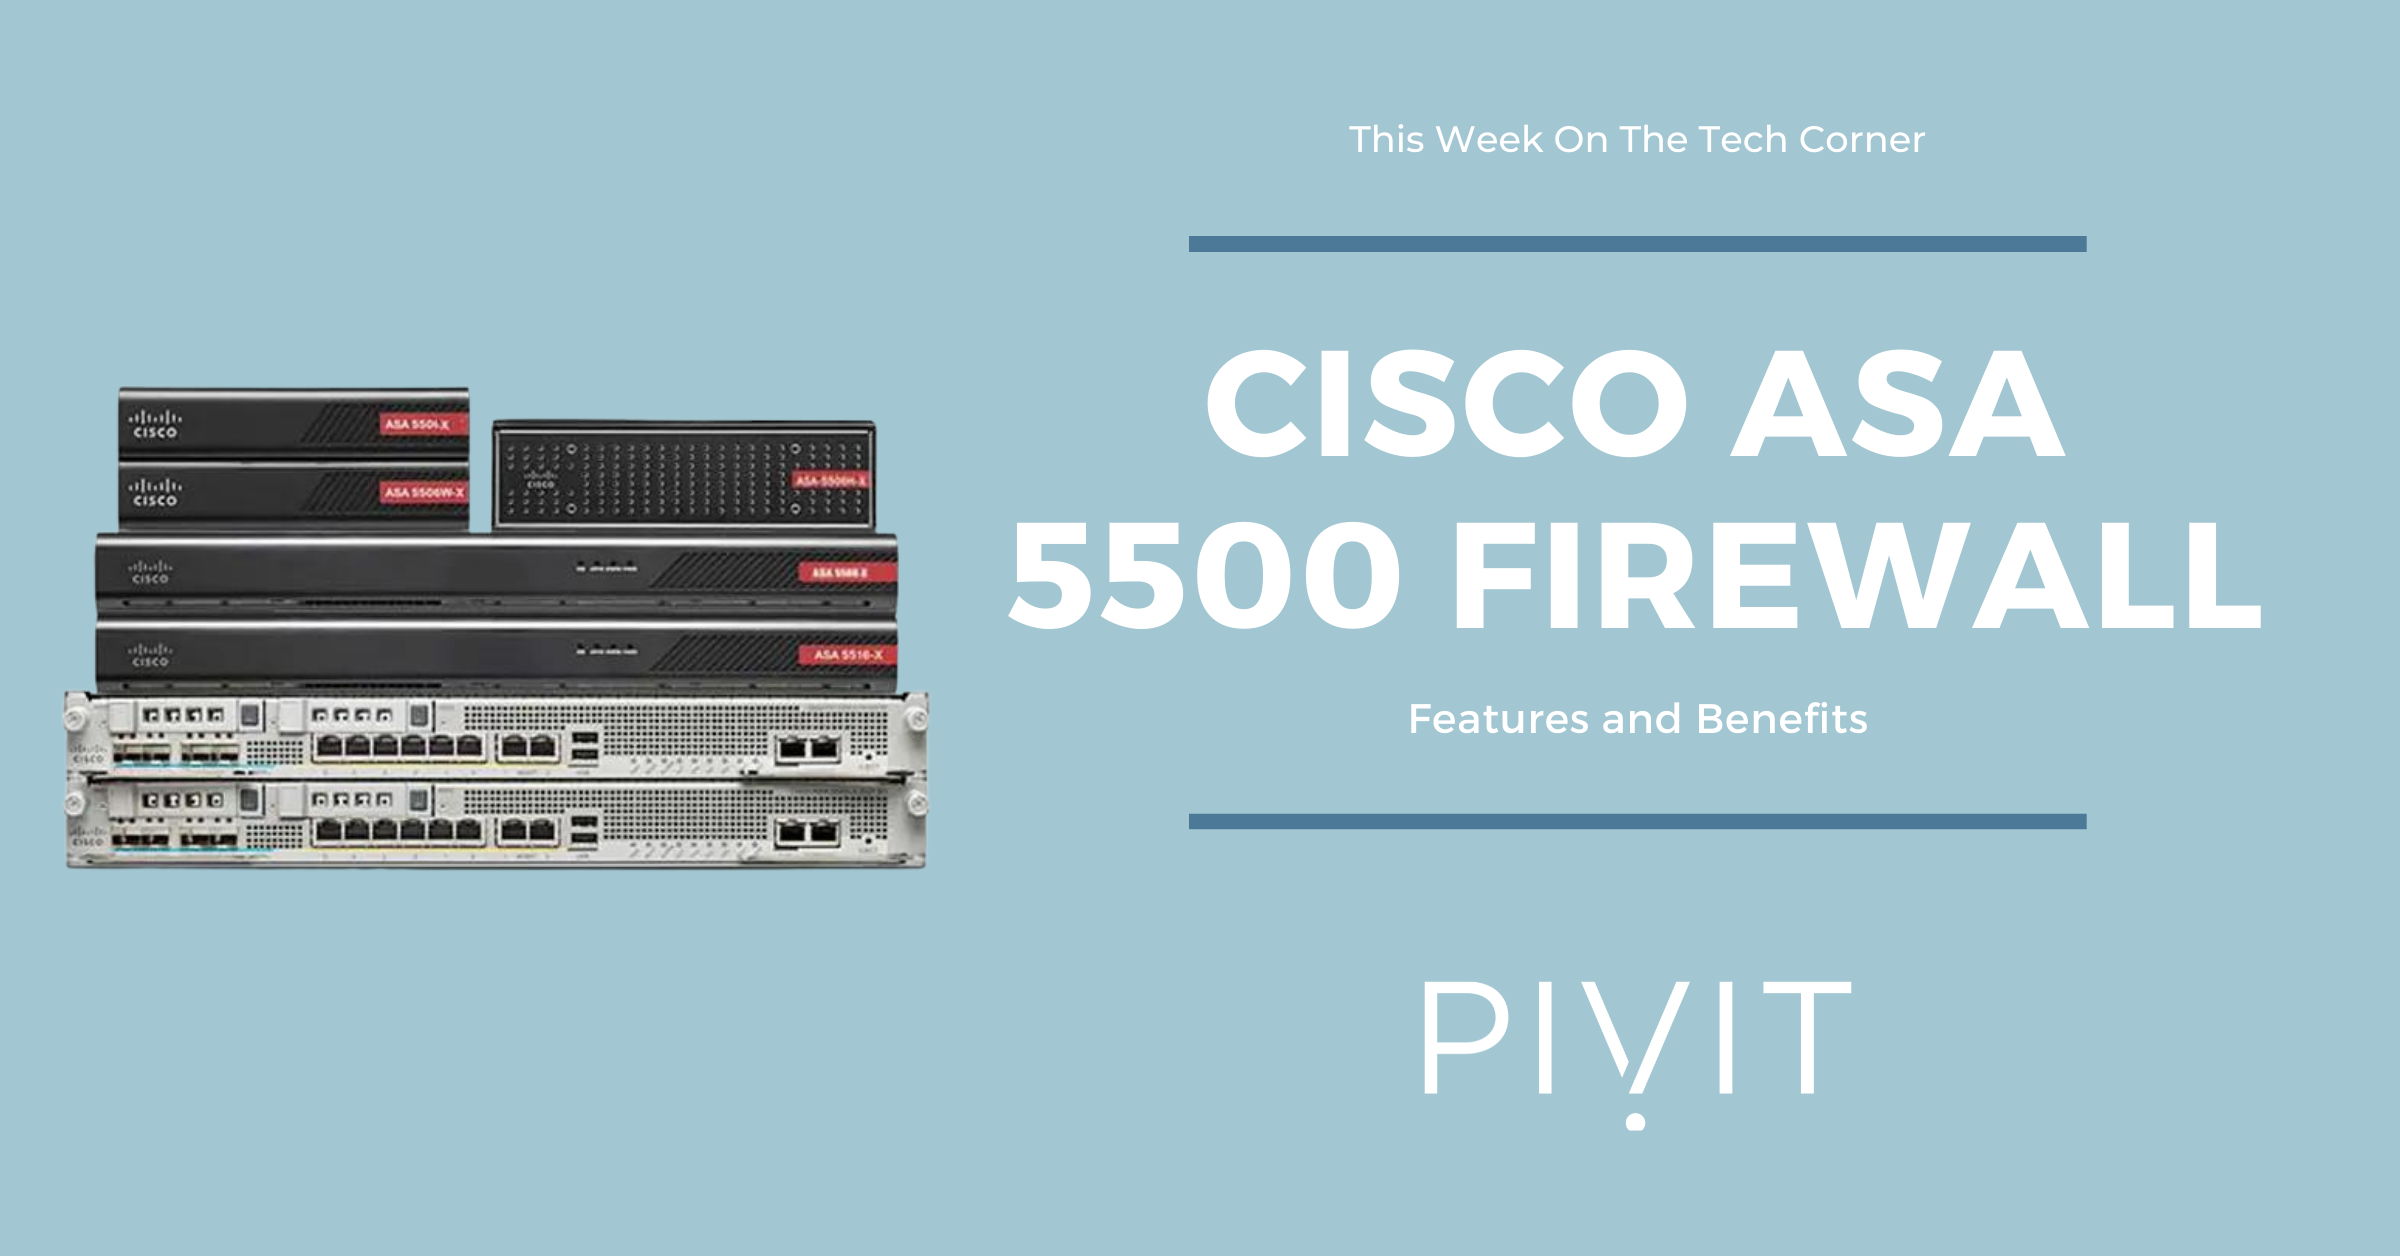 Cisco ASA 5500 Firewall Features and Benefits